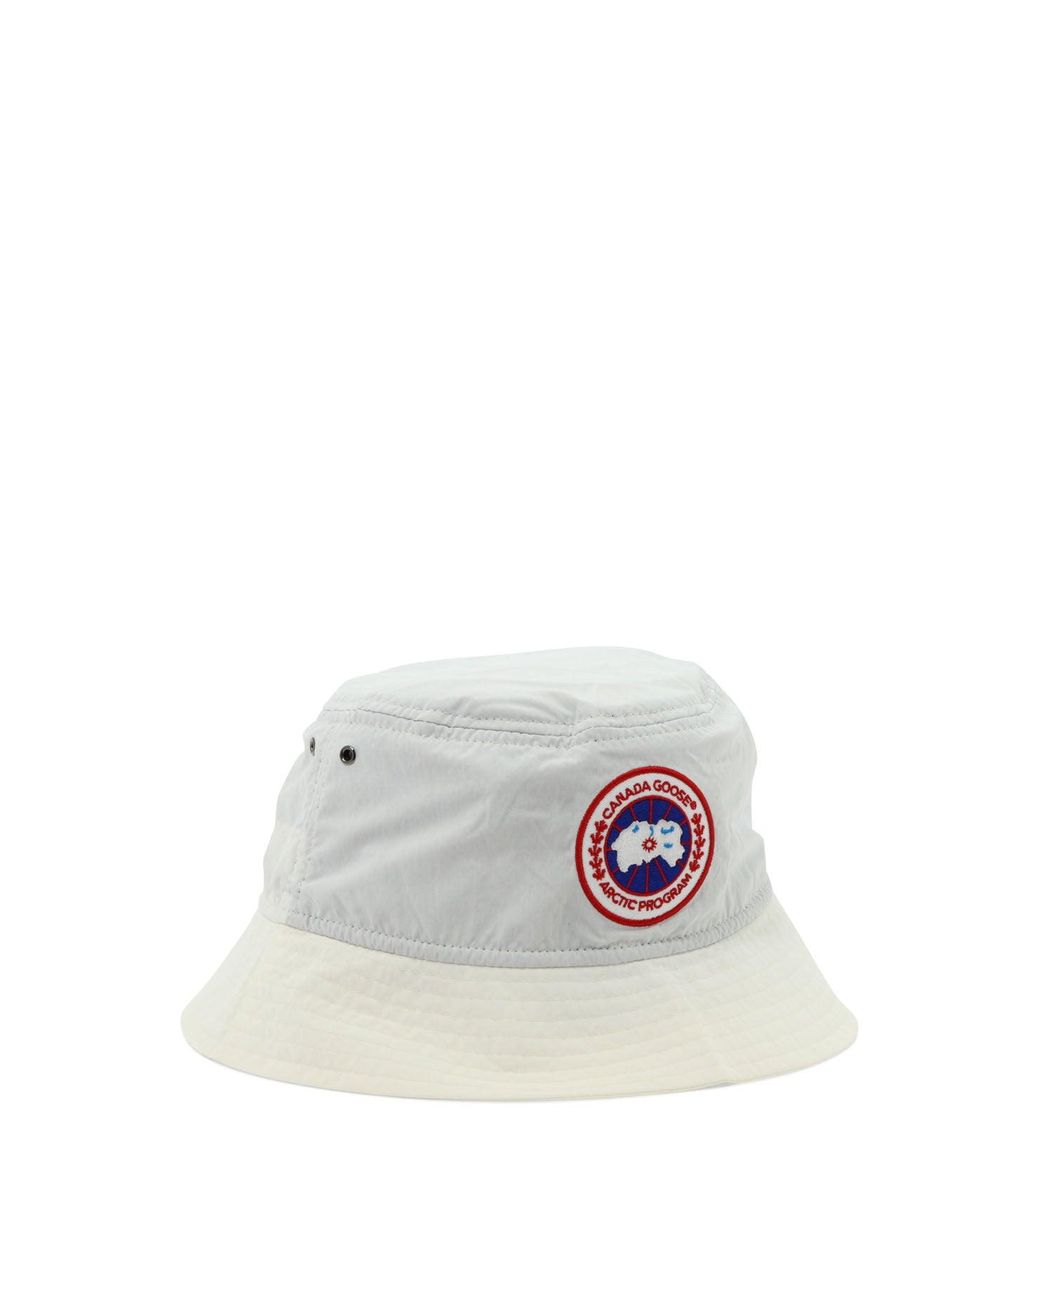 Canada Goose haven Bucket Hat in White for Men Mens Hats Canada Goose Hats 